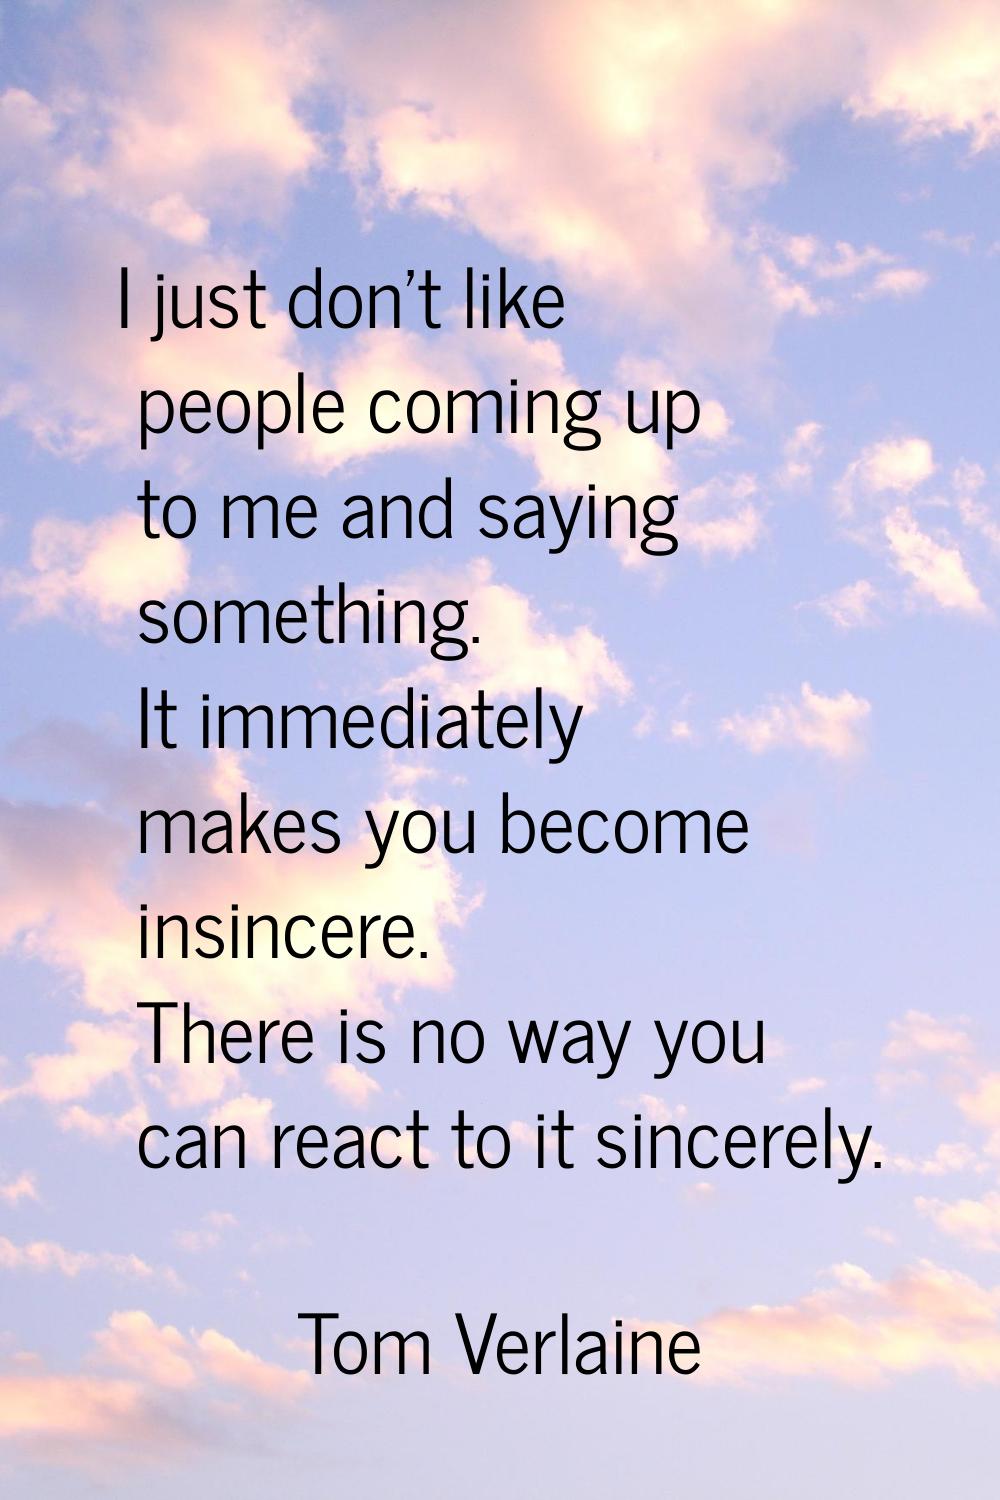 I just don't like people coming up to me and saying something. It immediately makes you become insi